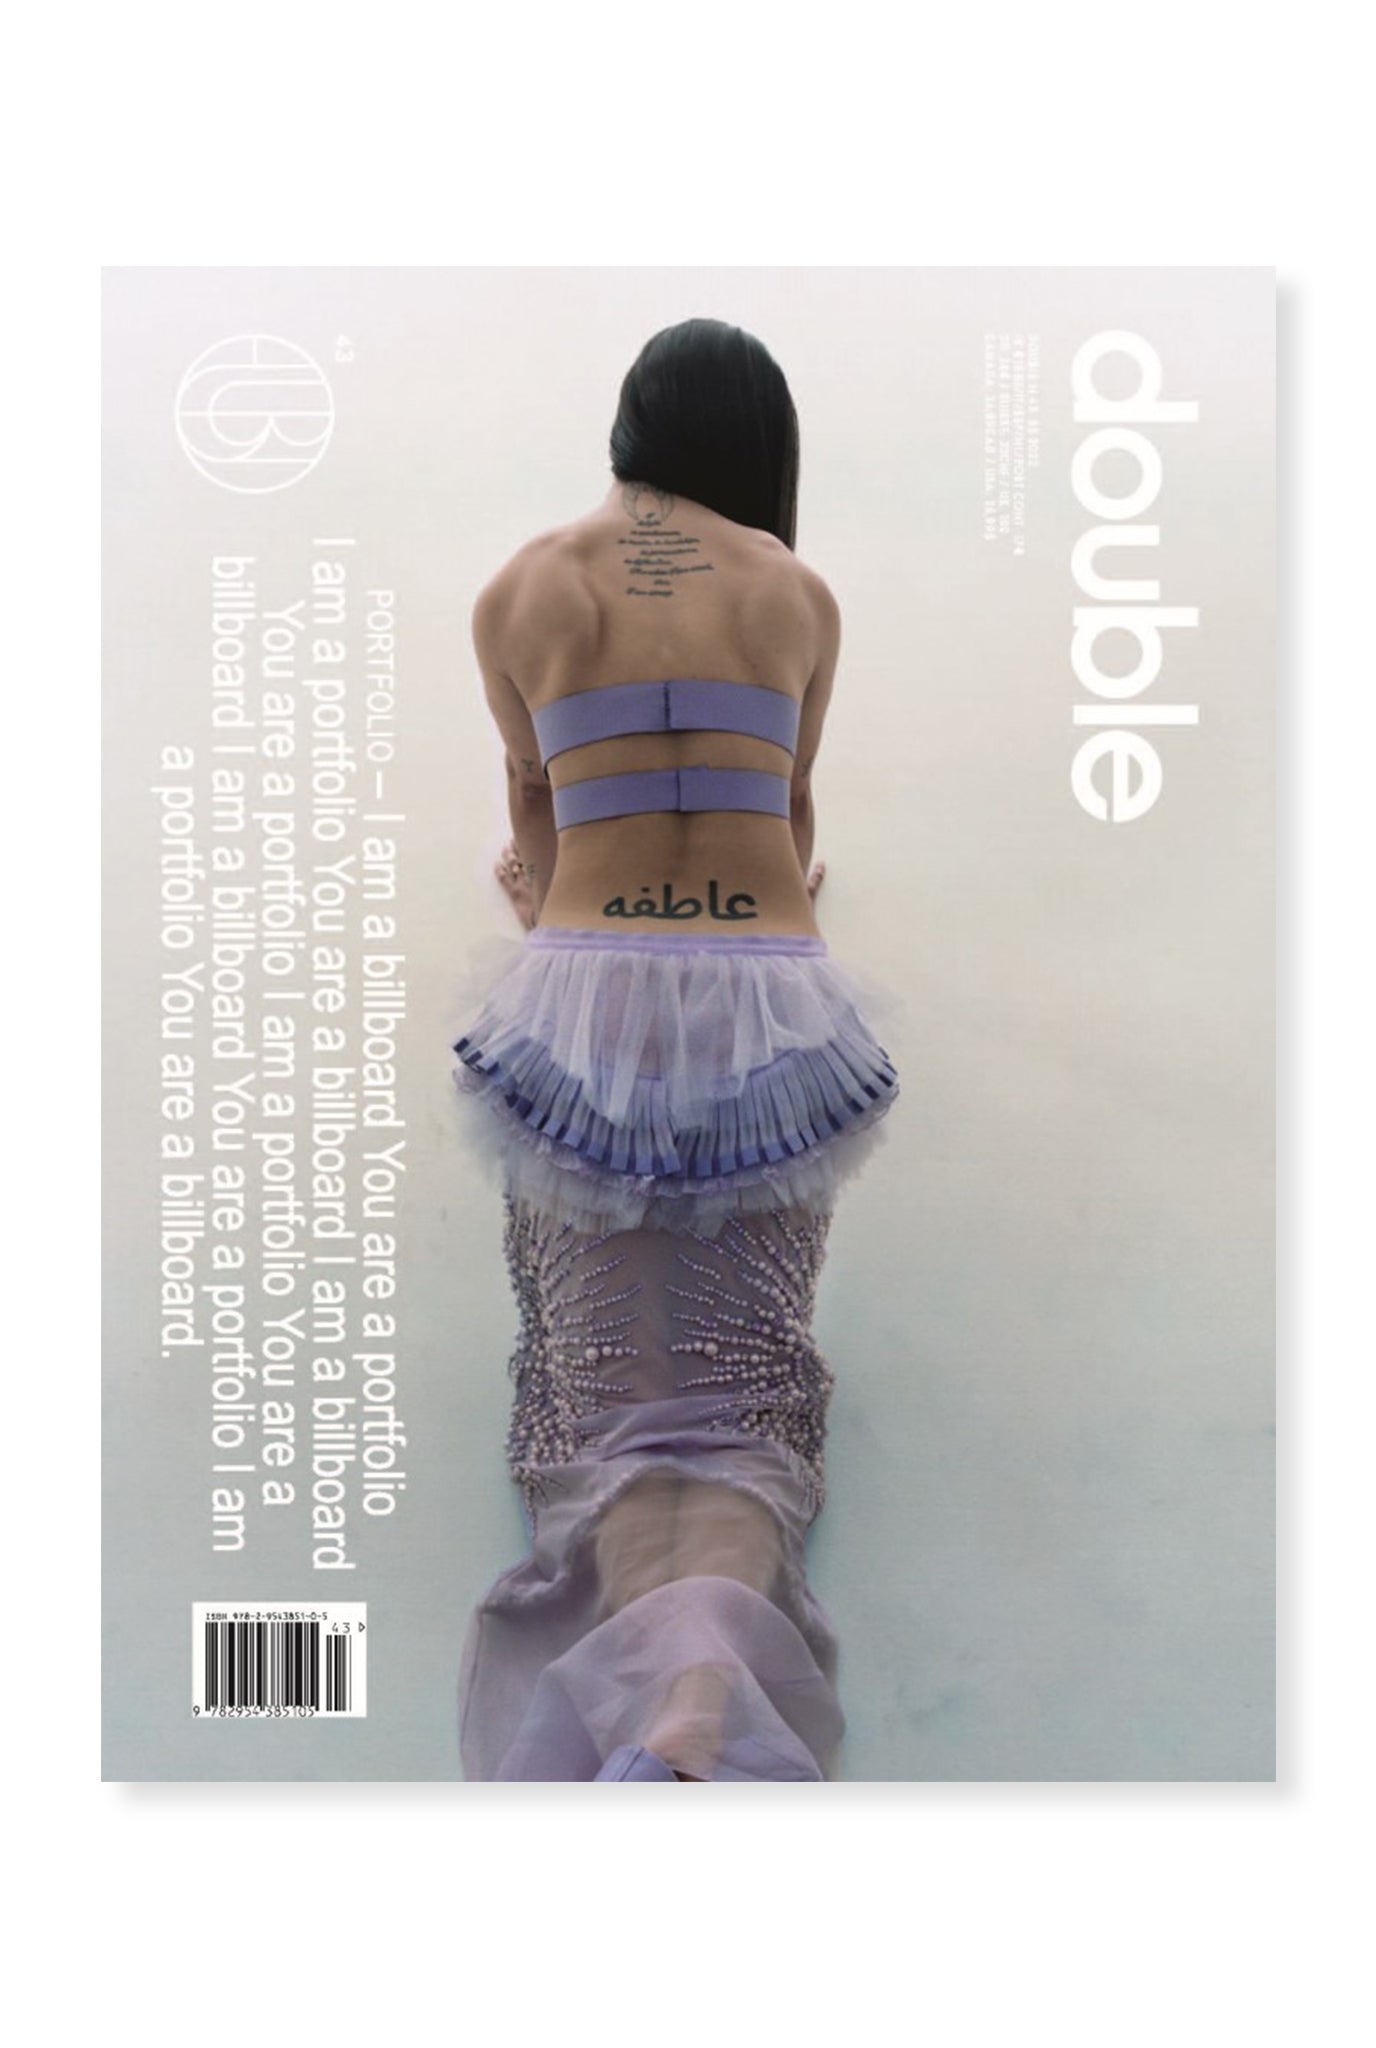 Double, Issue 43